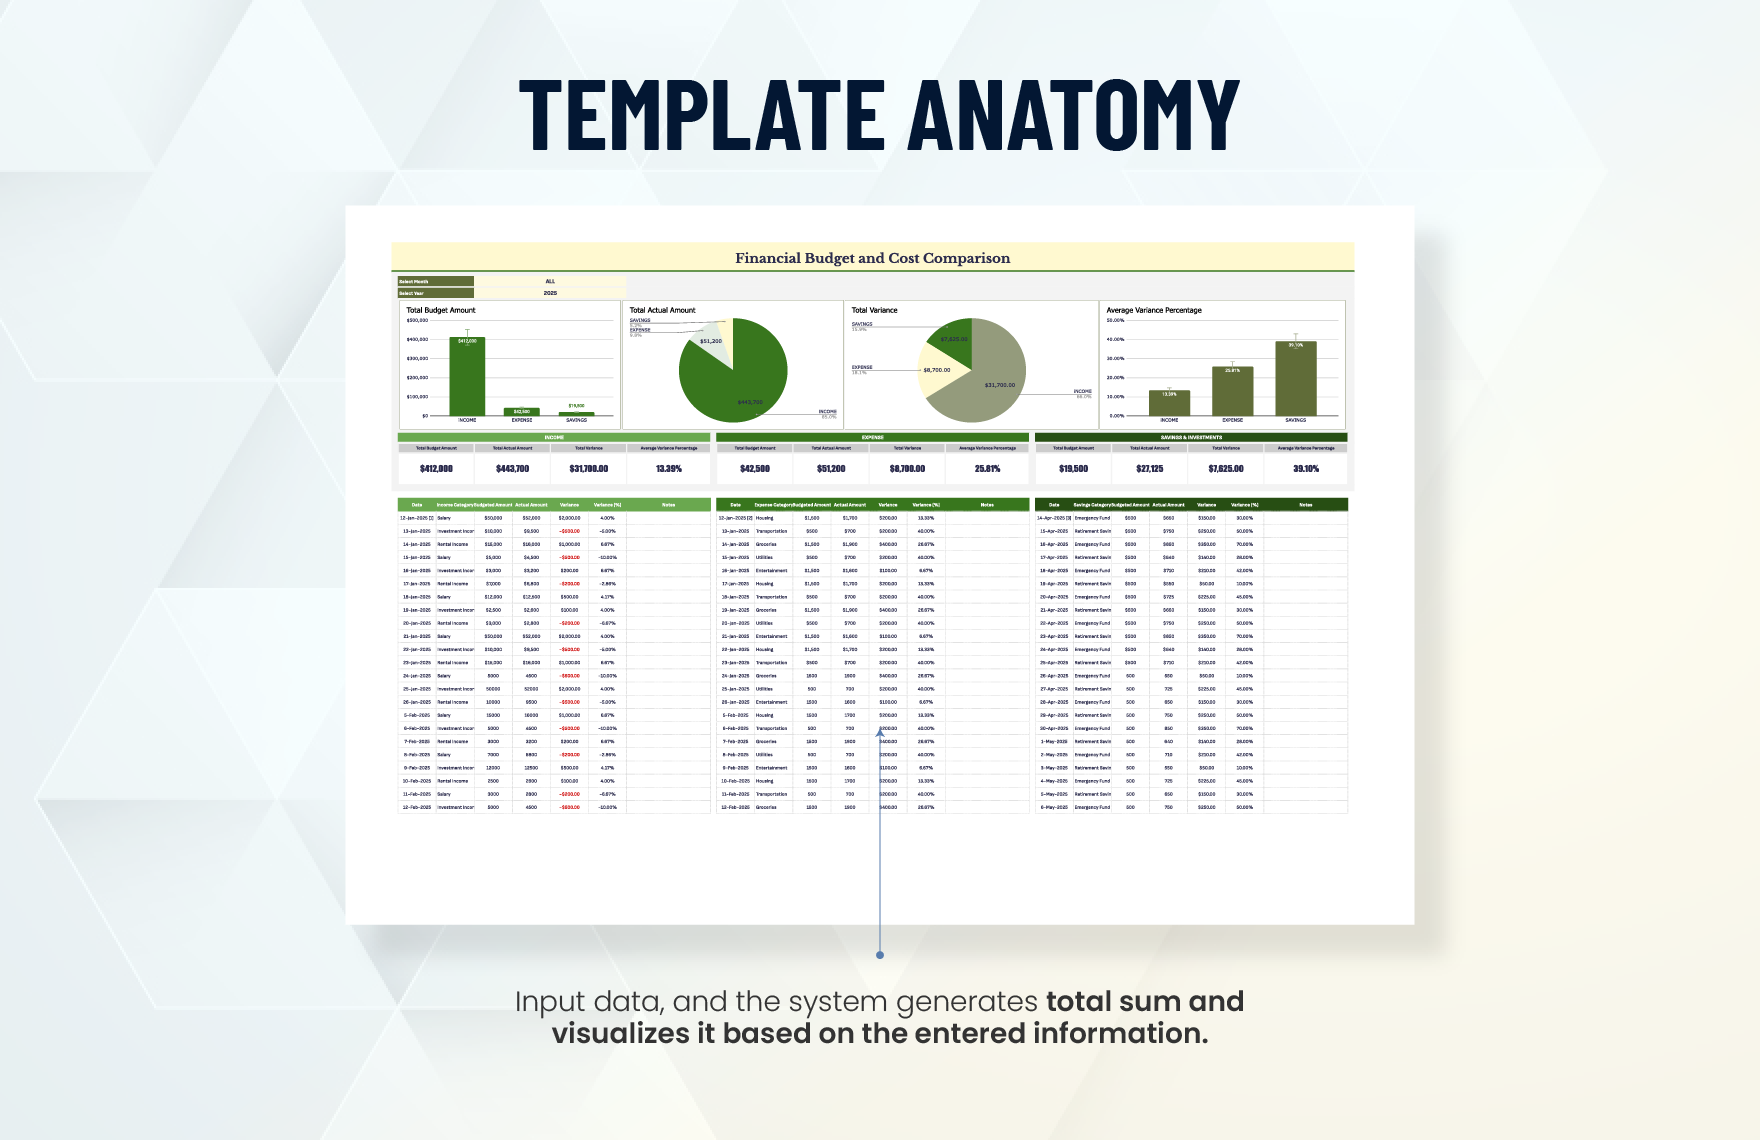 Financial Budget and Cost Comparison Template